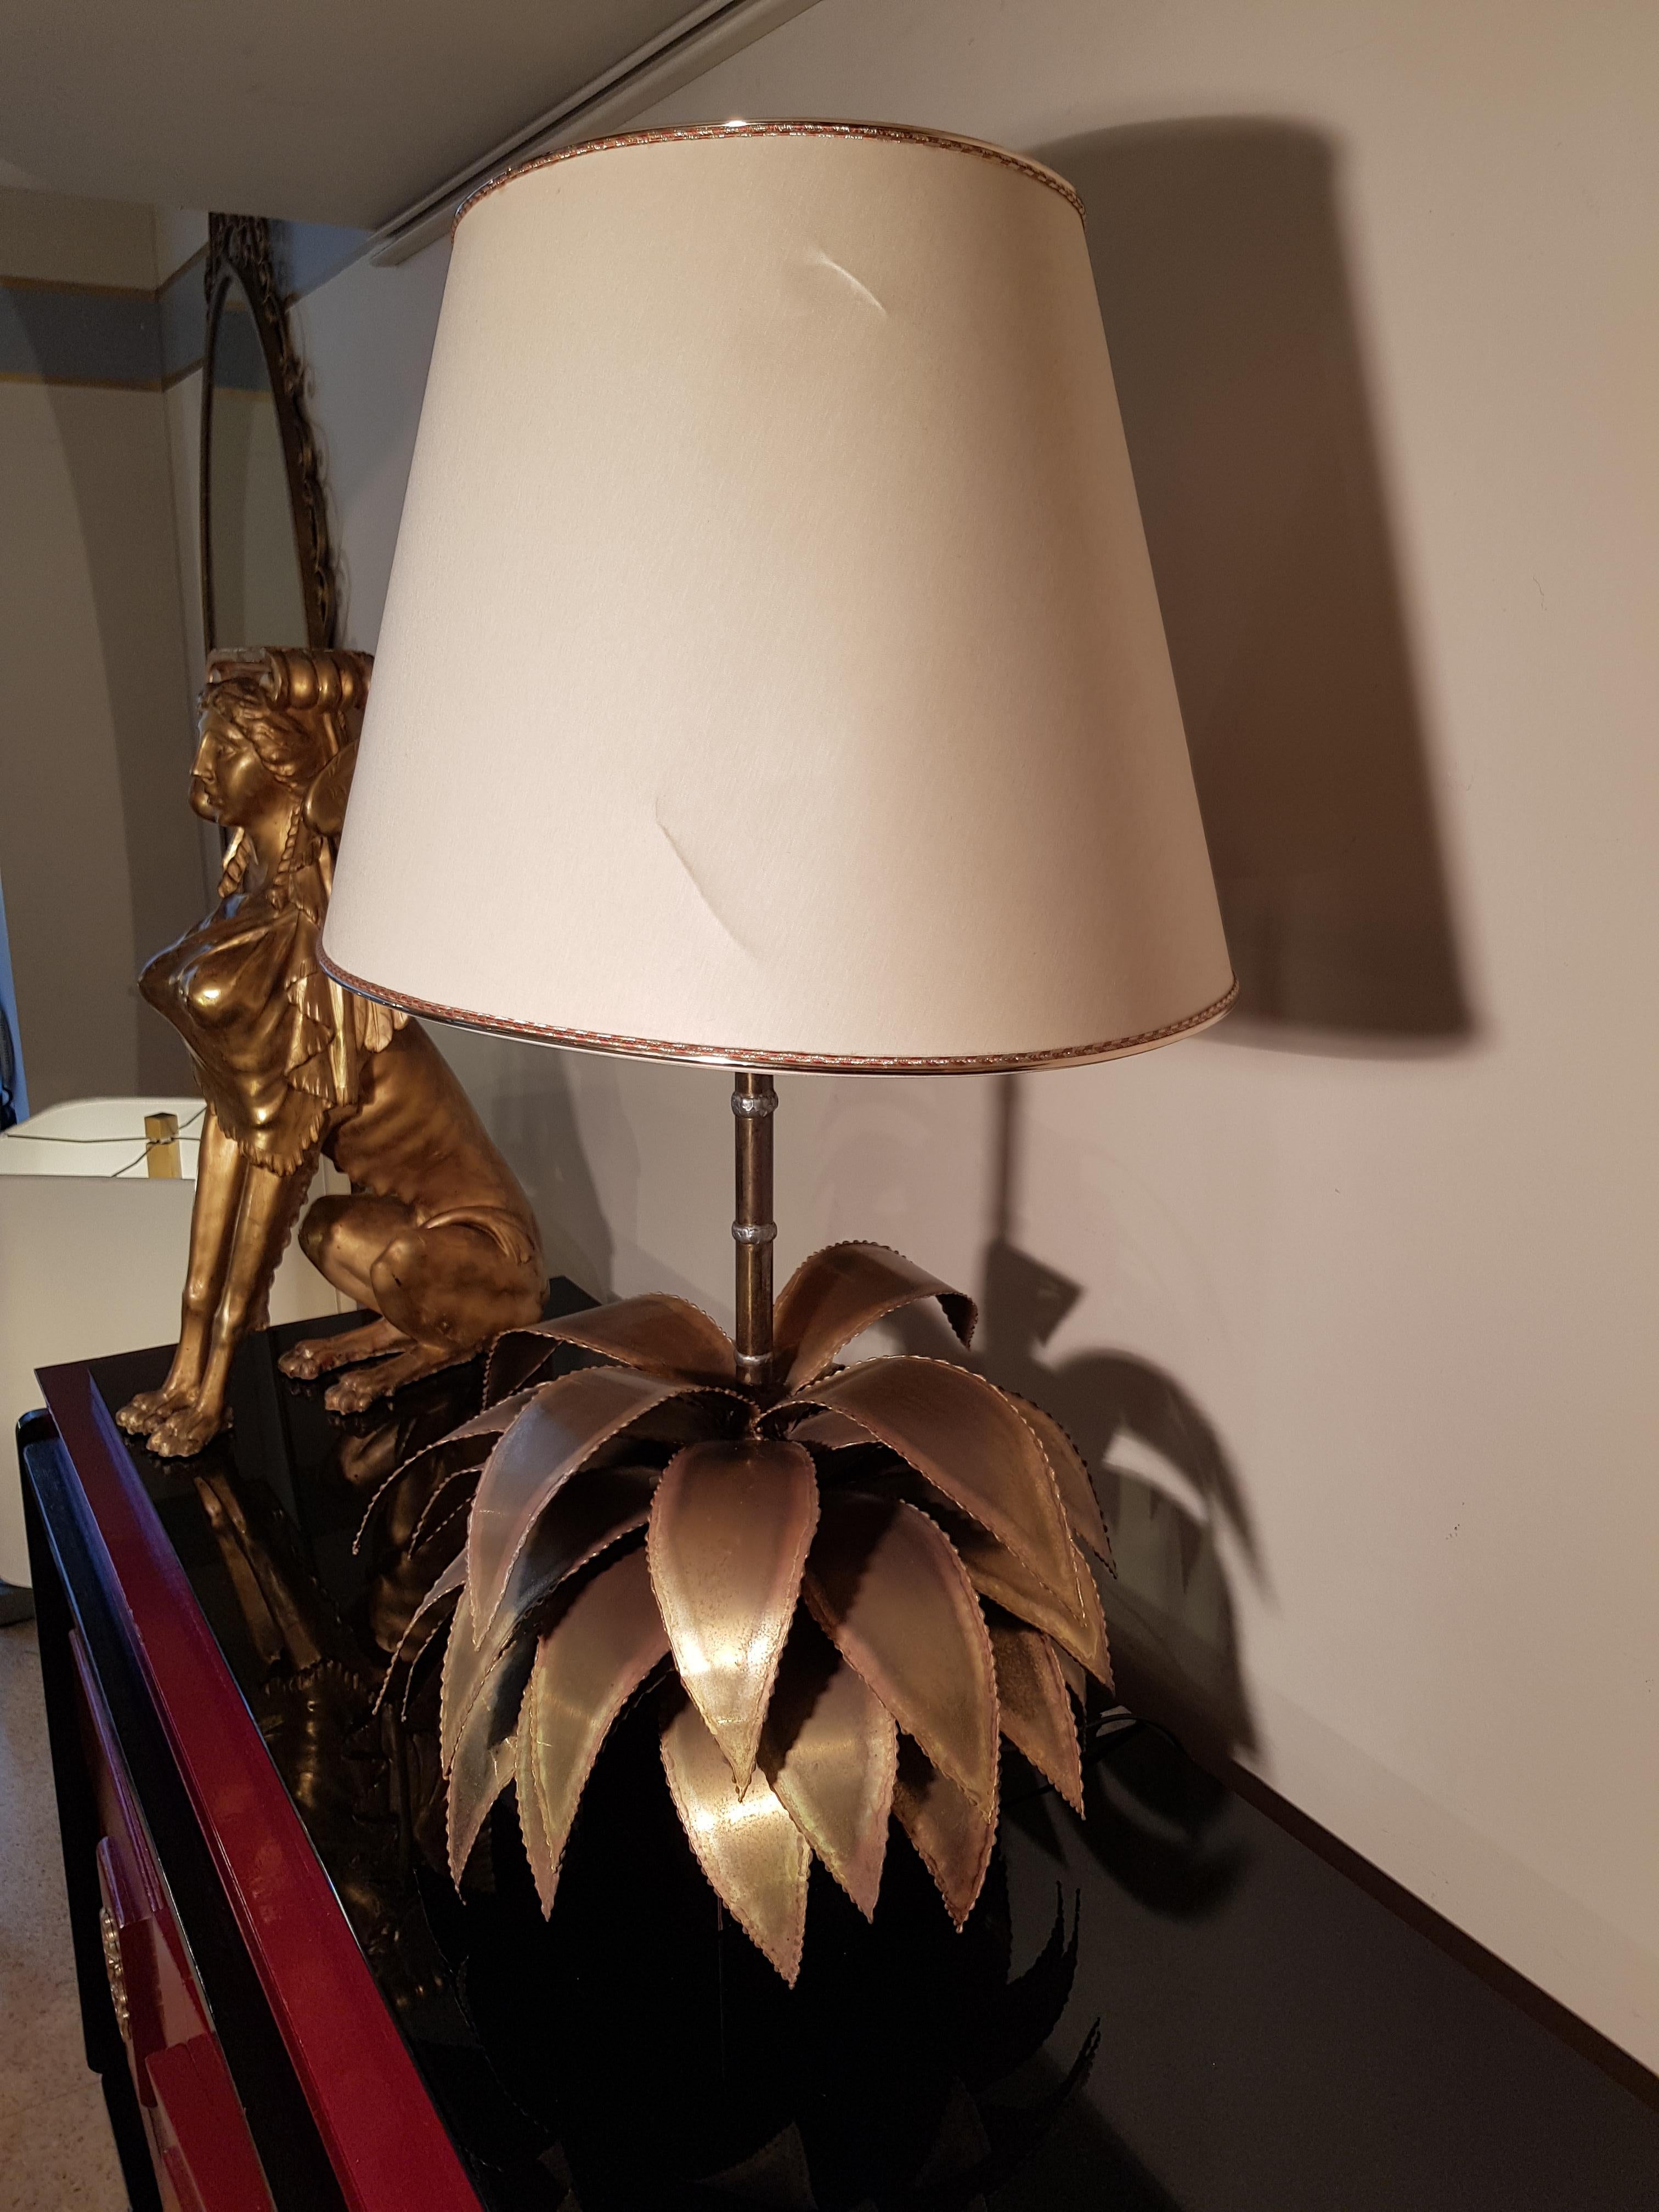 Table Lamp attributed to Maison Jansen, representing a palm tree with brass leaves, bronze trunk and black laminated vase. No signature is present but the quality of brass work and welds are typical of the Maison Jansen works. The lamp carries one